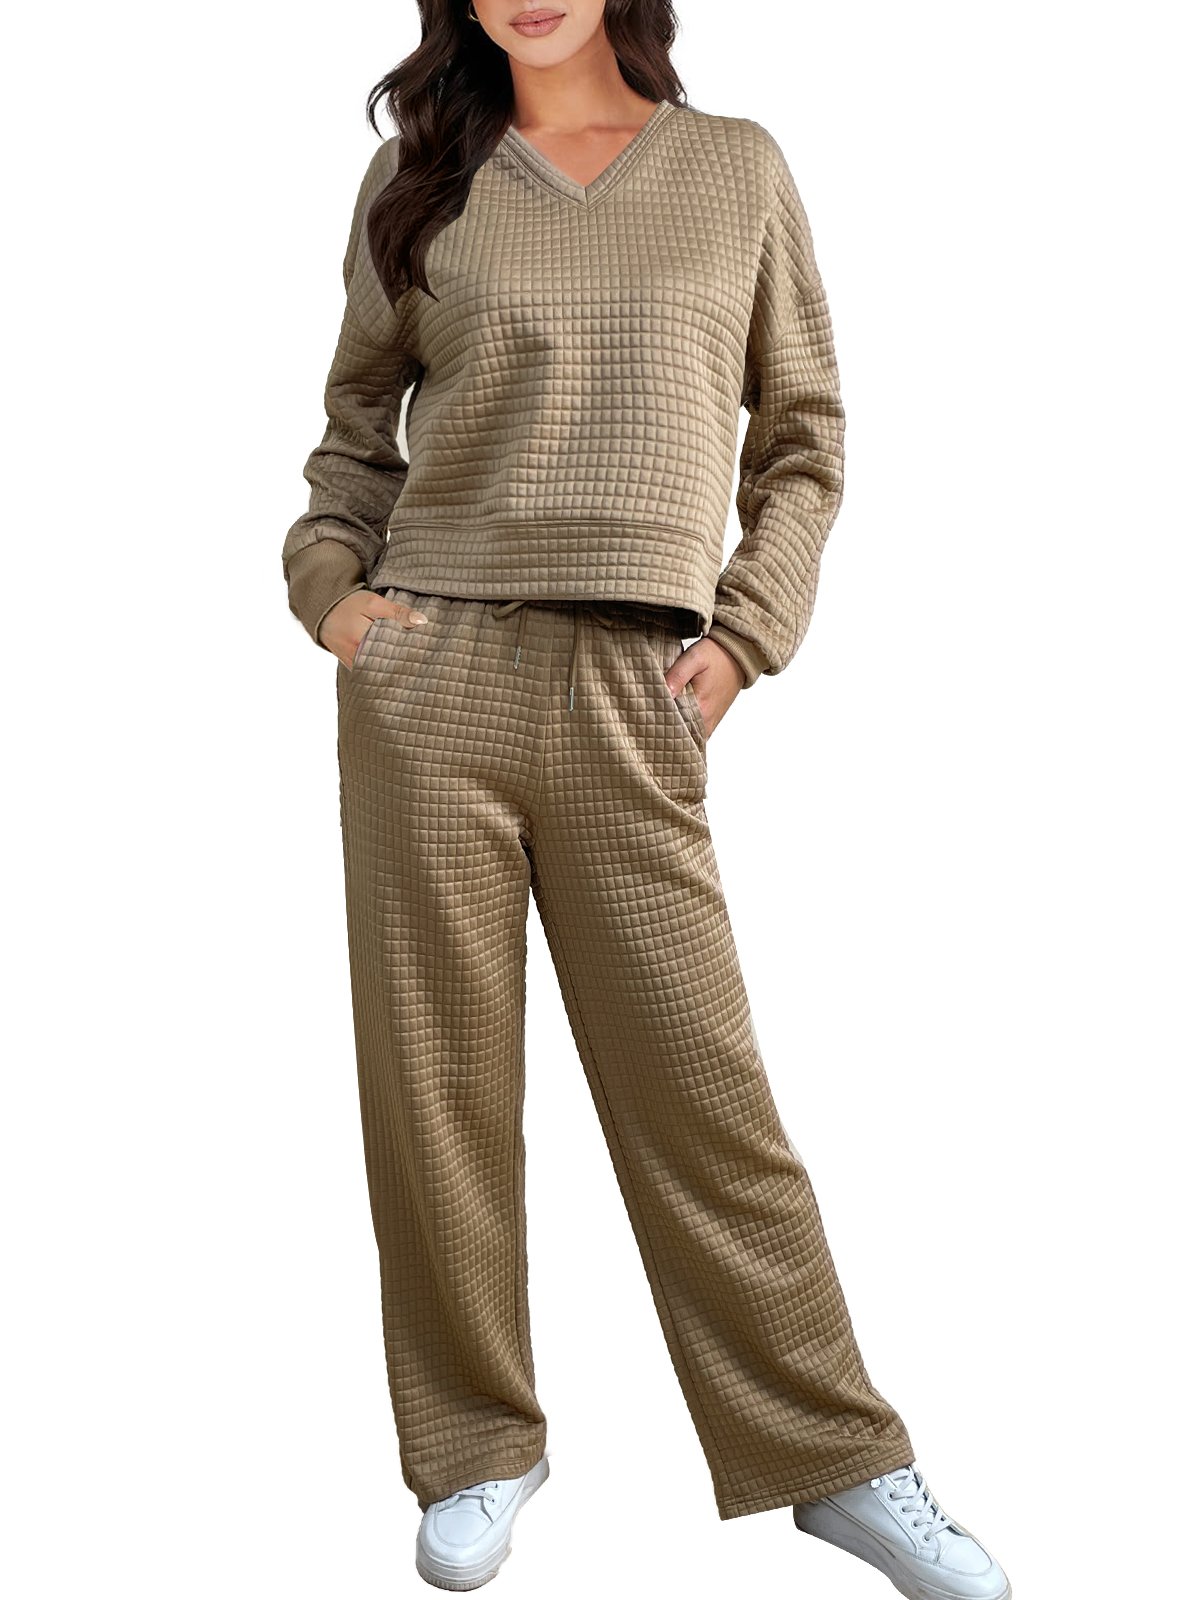 Women's Plain Daily Going Out Two-Piece Set Khaki Casual Spring/Fall Top With Pants Matching Set